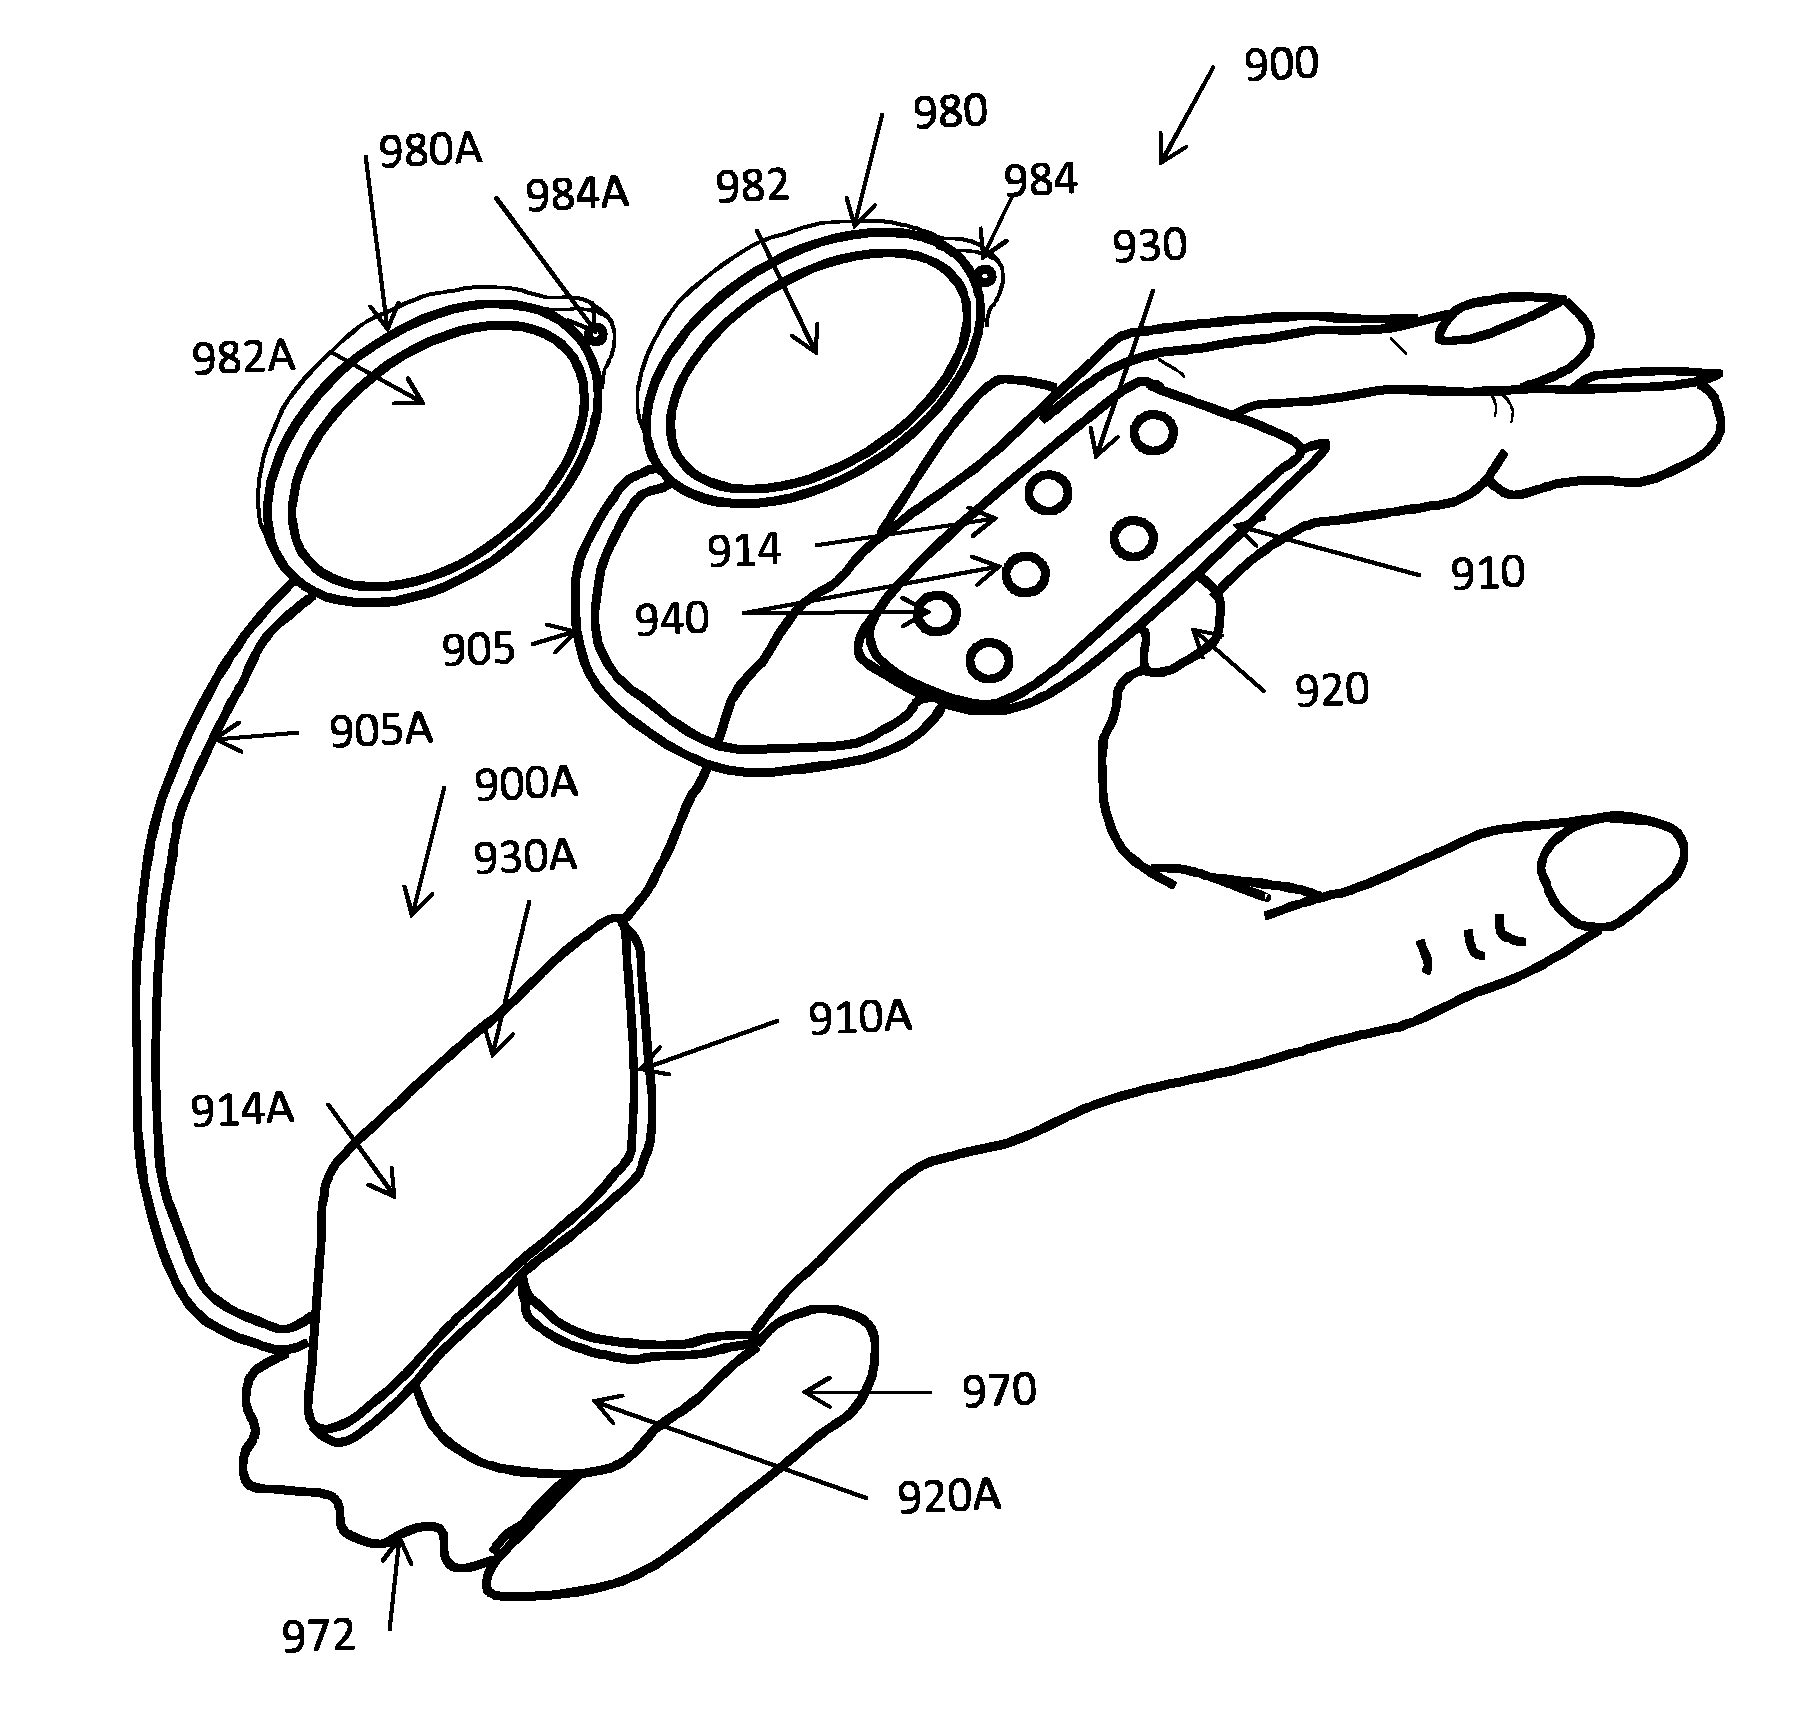 Apparatus for assisting in handling small items